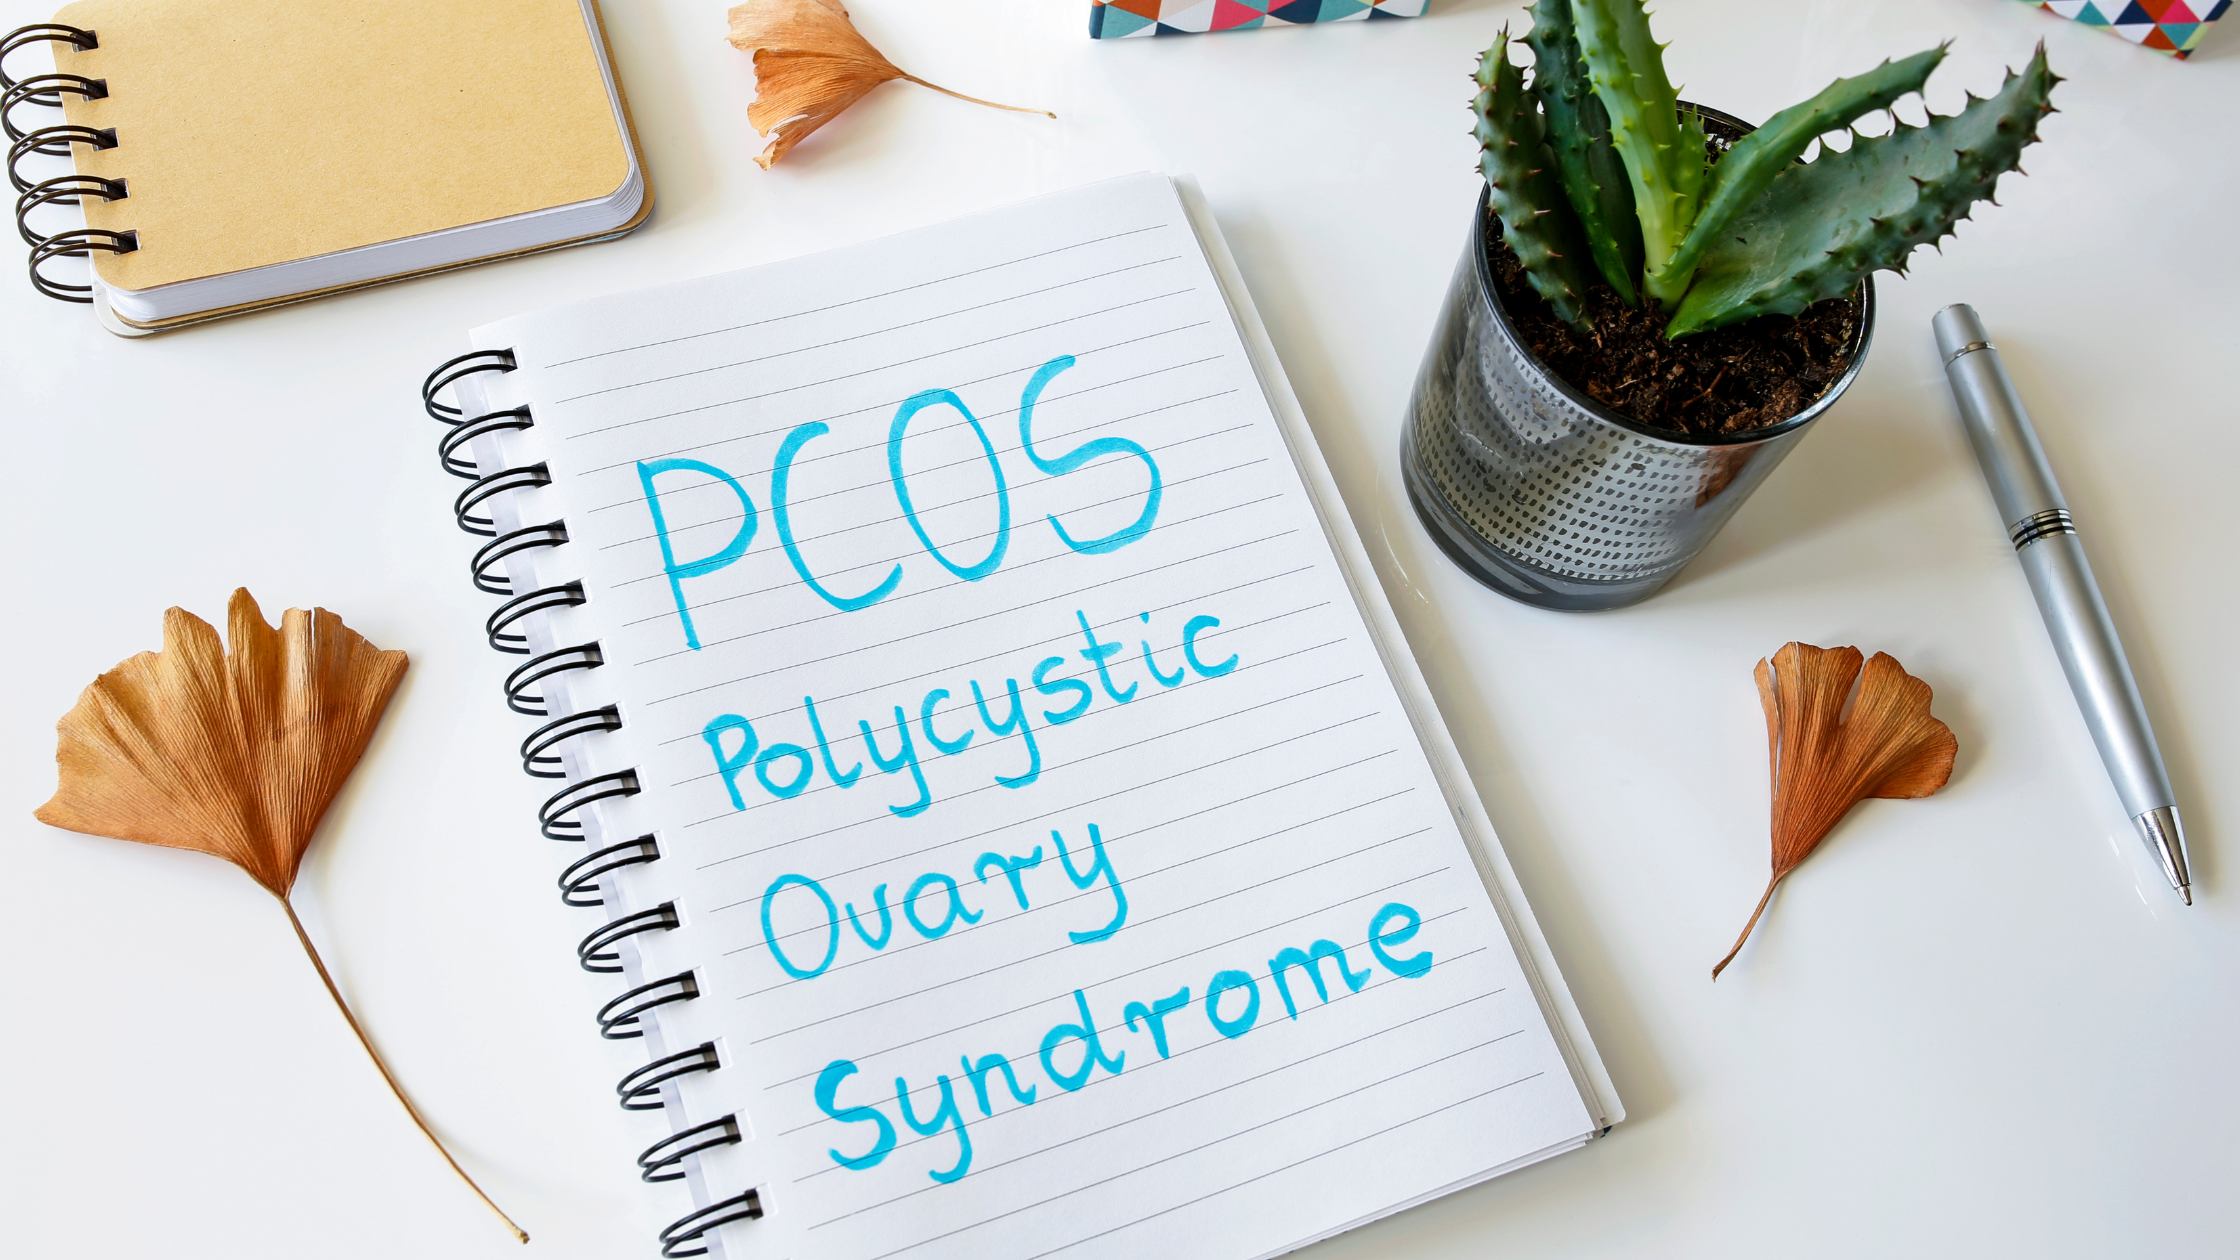 PCOS written on a pad of paper